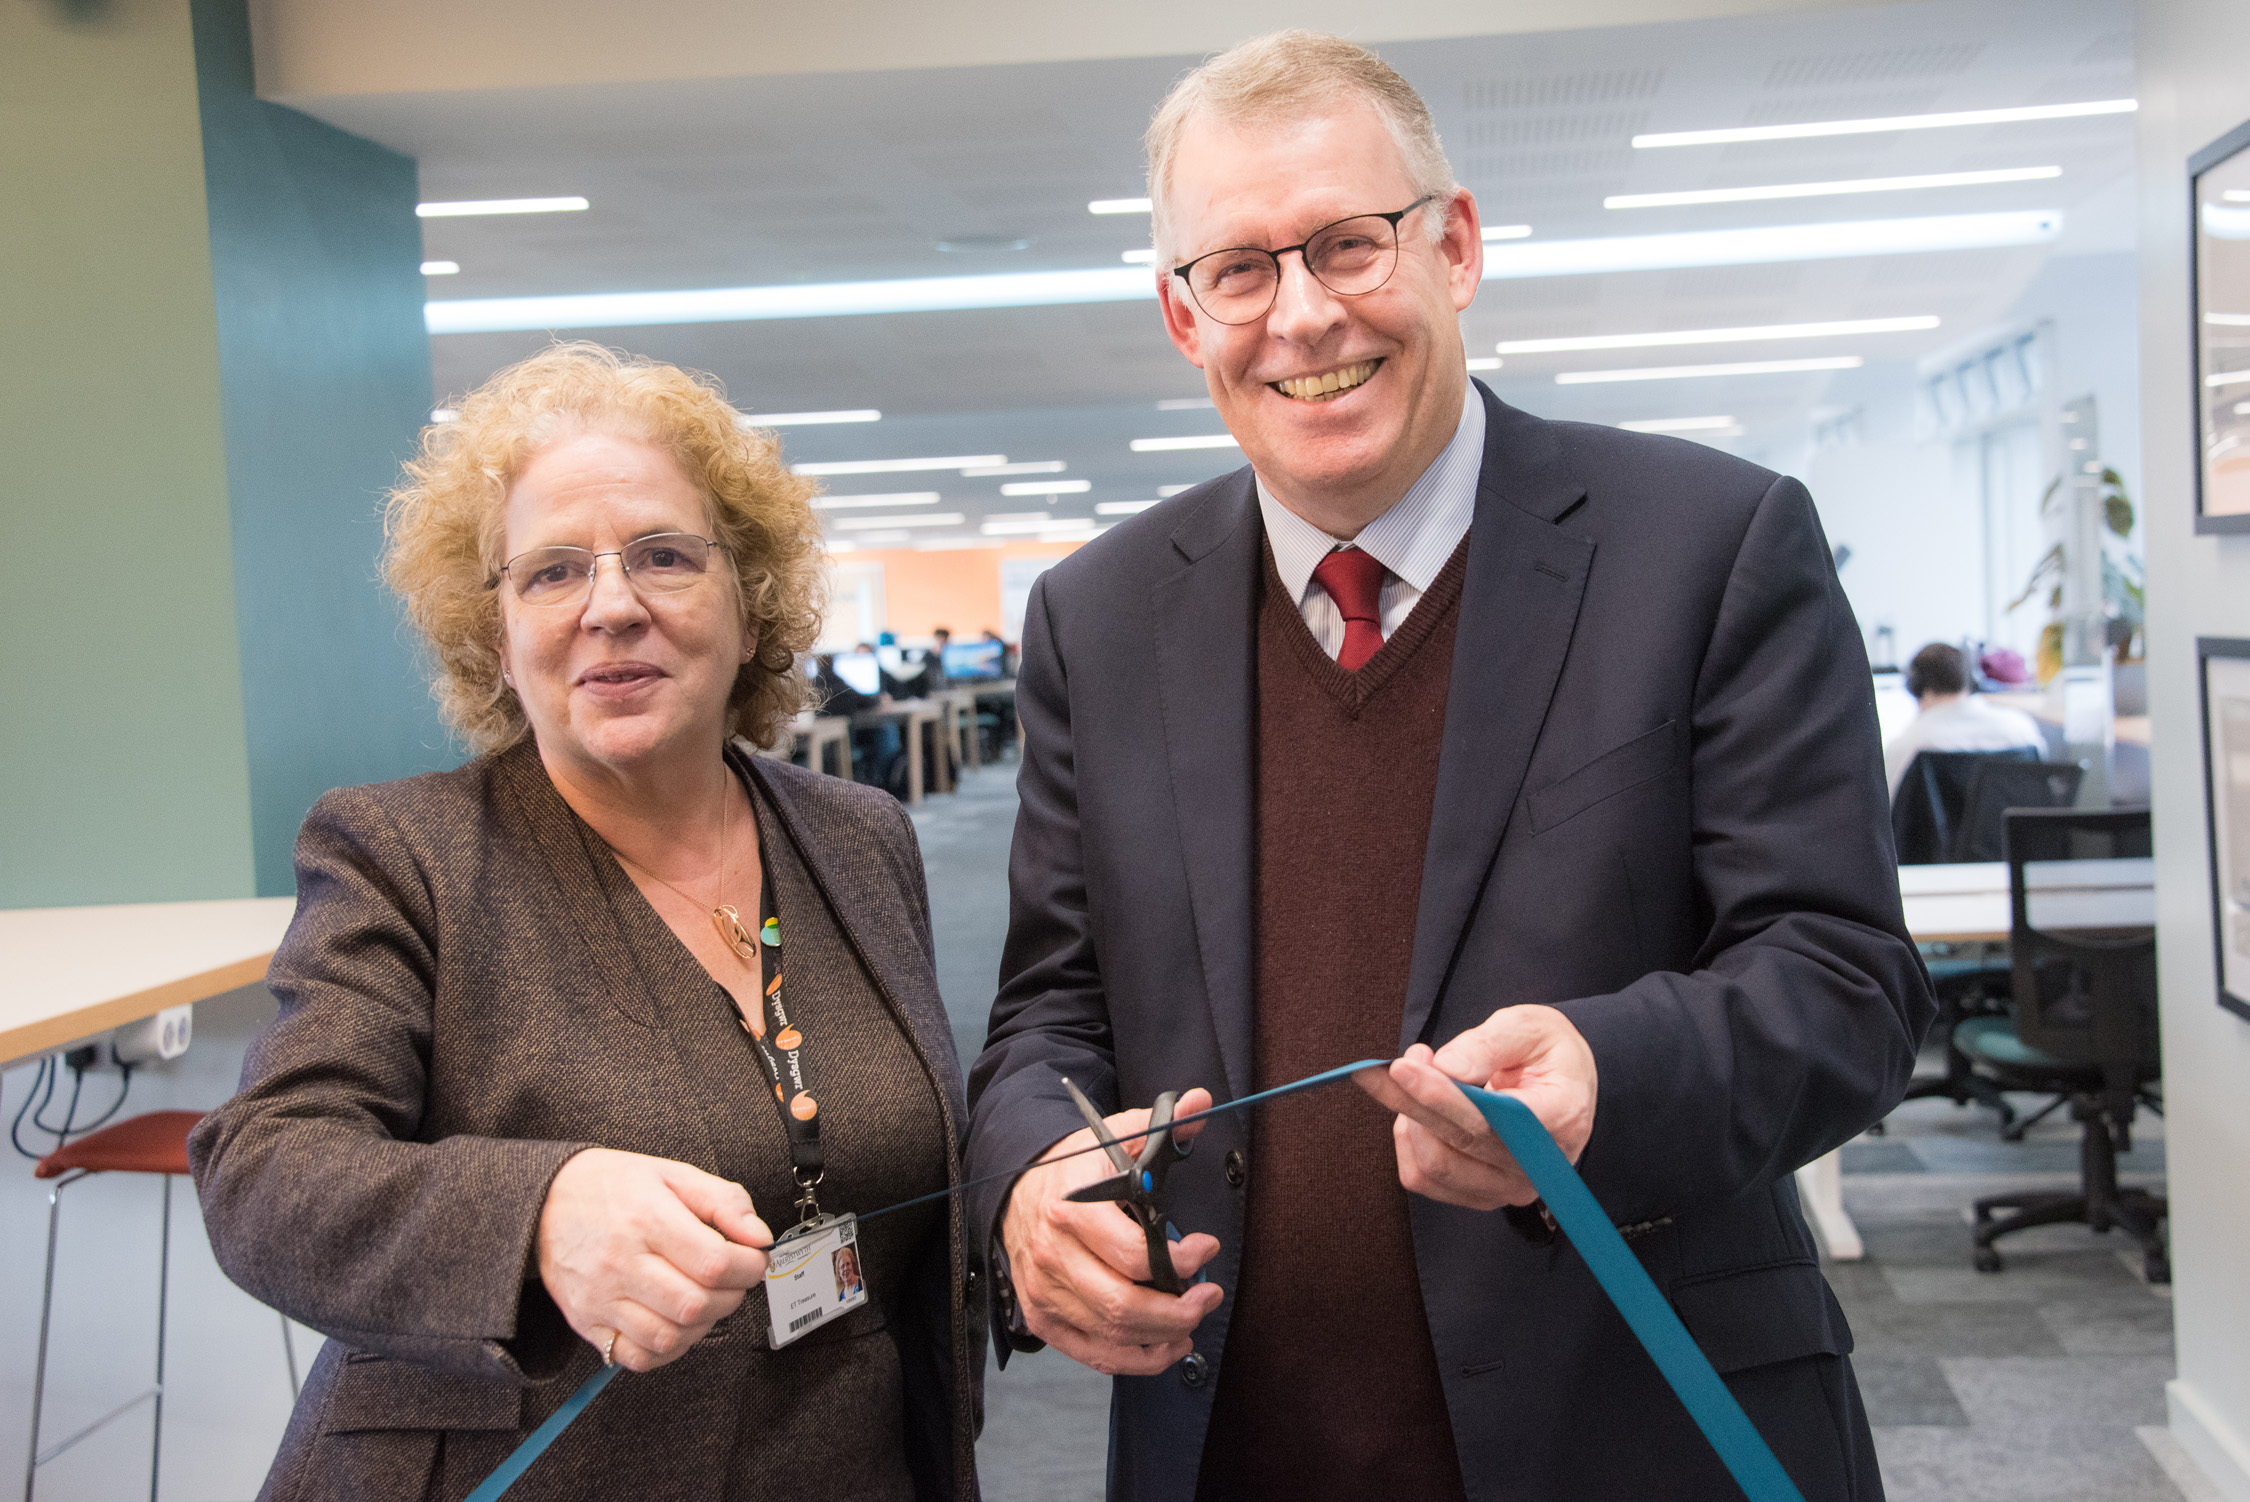 Vice-Chancellor Professor Elizabeth Treasure with David Allen OBE, Chair of the Higher Education Funding Council for Wales cutting the ribbon to officially open the newly refurbished Iris De Freitas Study Room on Penglais Campus, Aberystwyth University, 27 November 2019